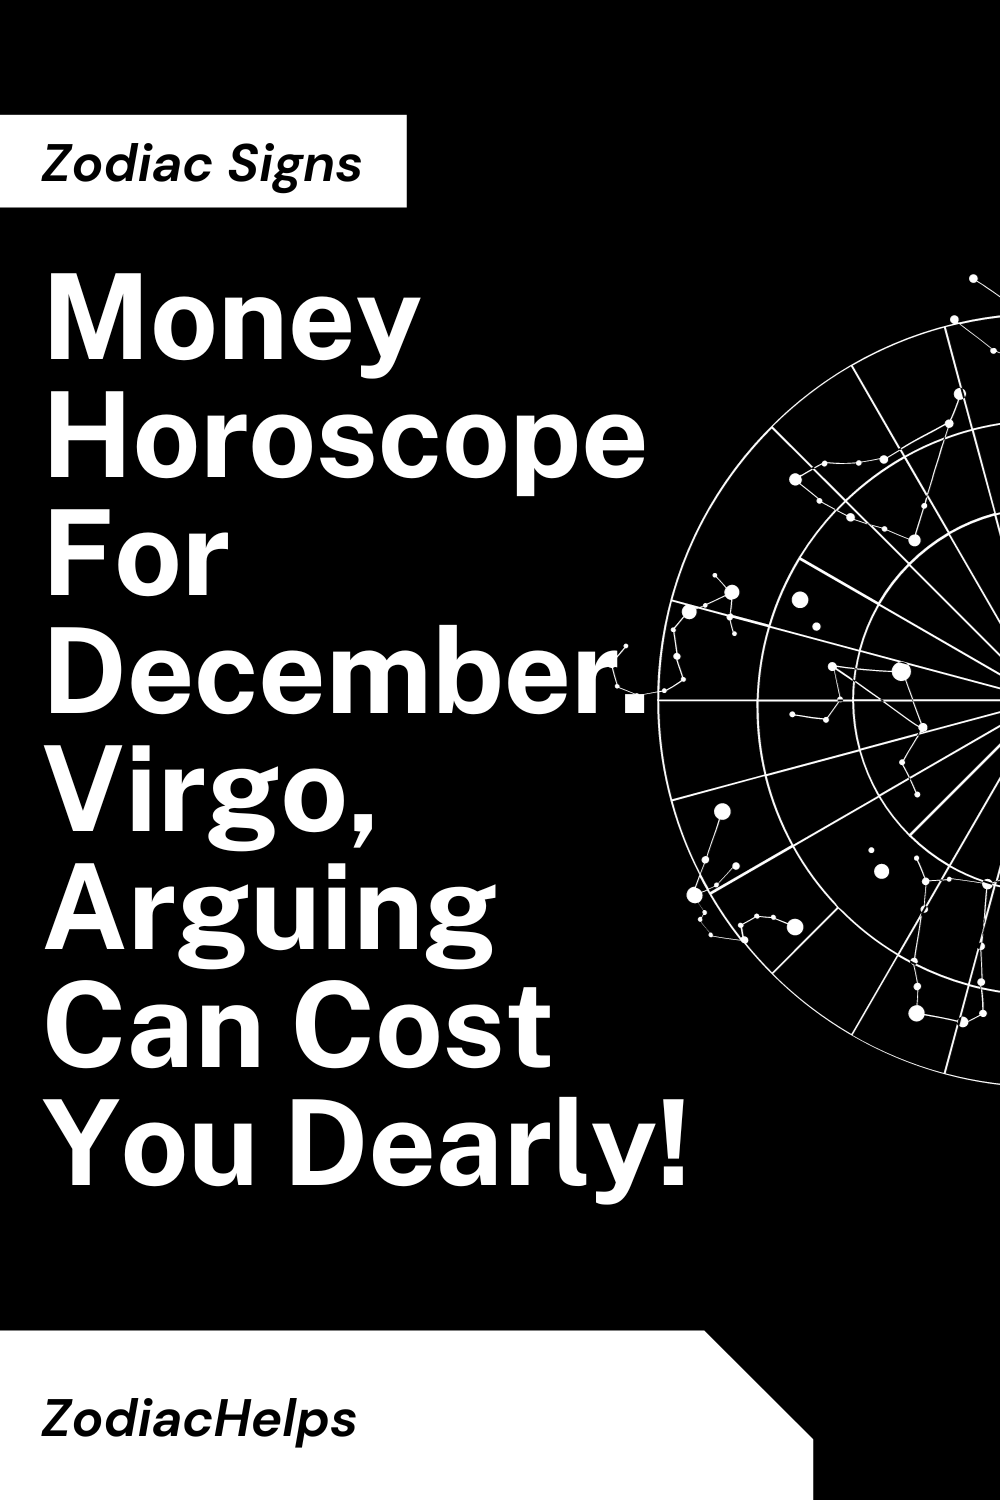 Money Horoscope For December. Virgo, Arguing Can Cost You Dearly!